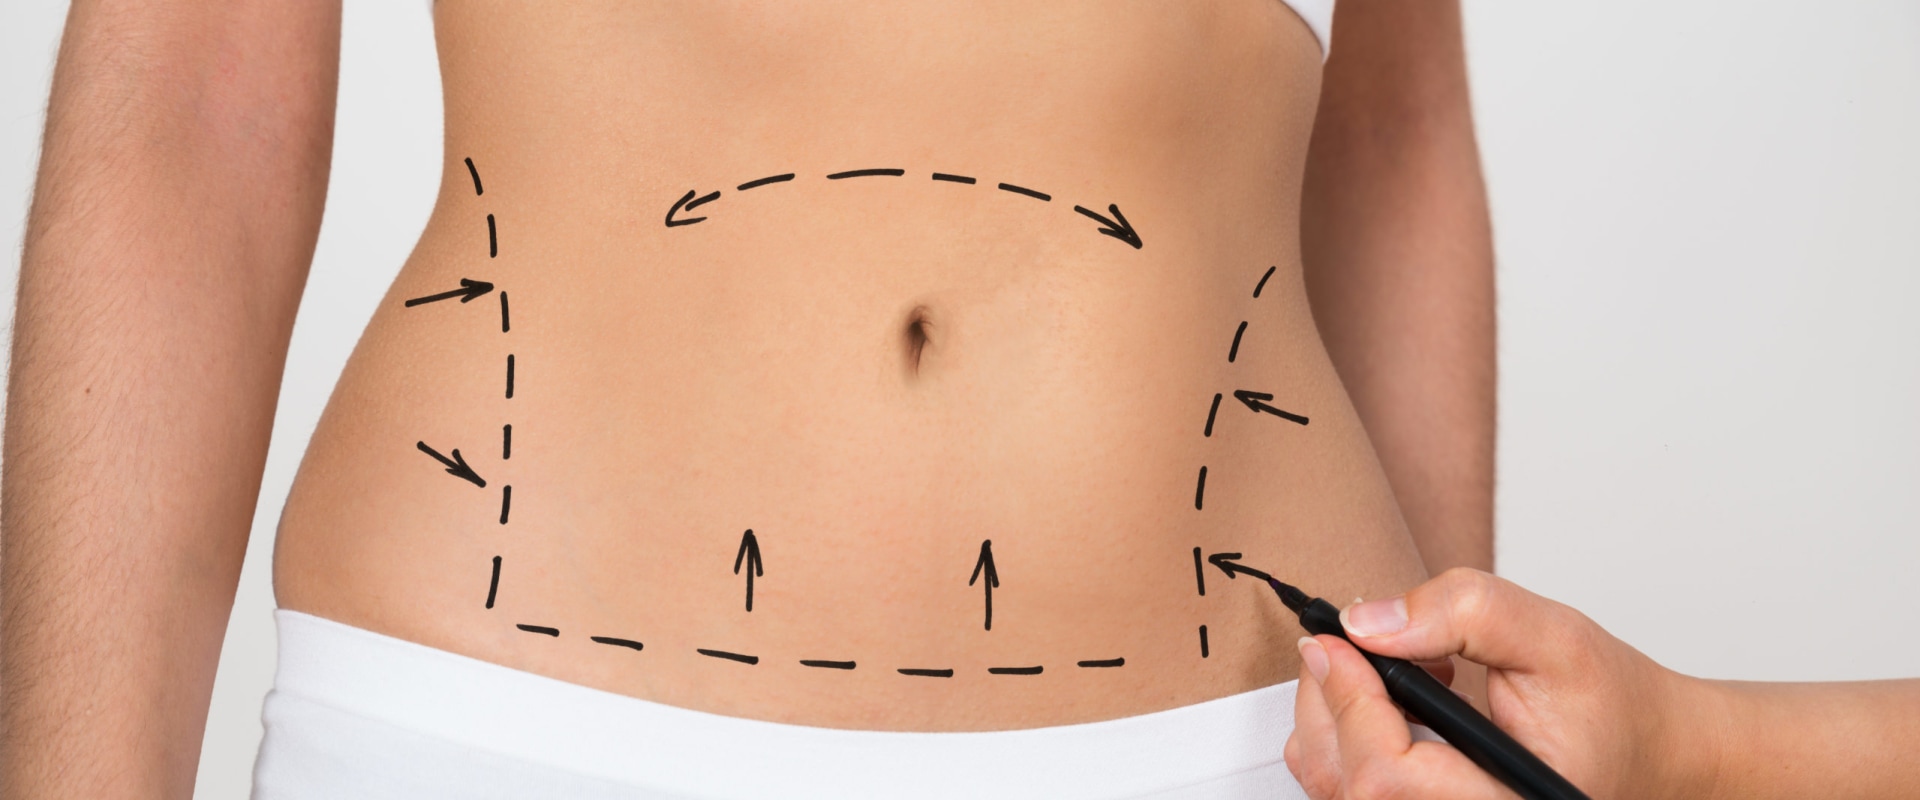 Comparing Liposuction and CoolSculpting: Which Fat Reduction Treatment is Right for You?